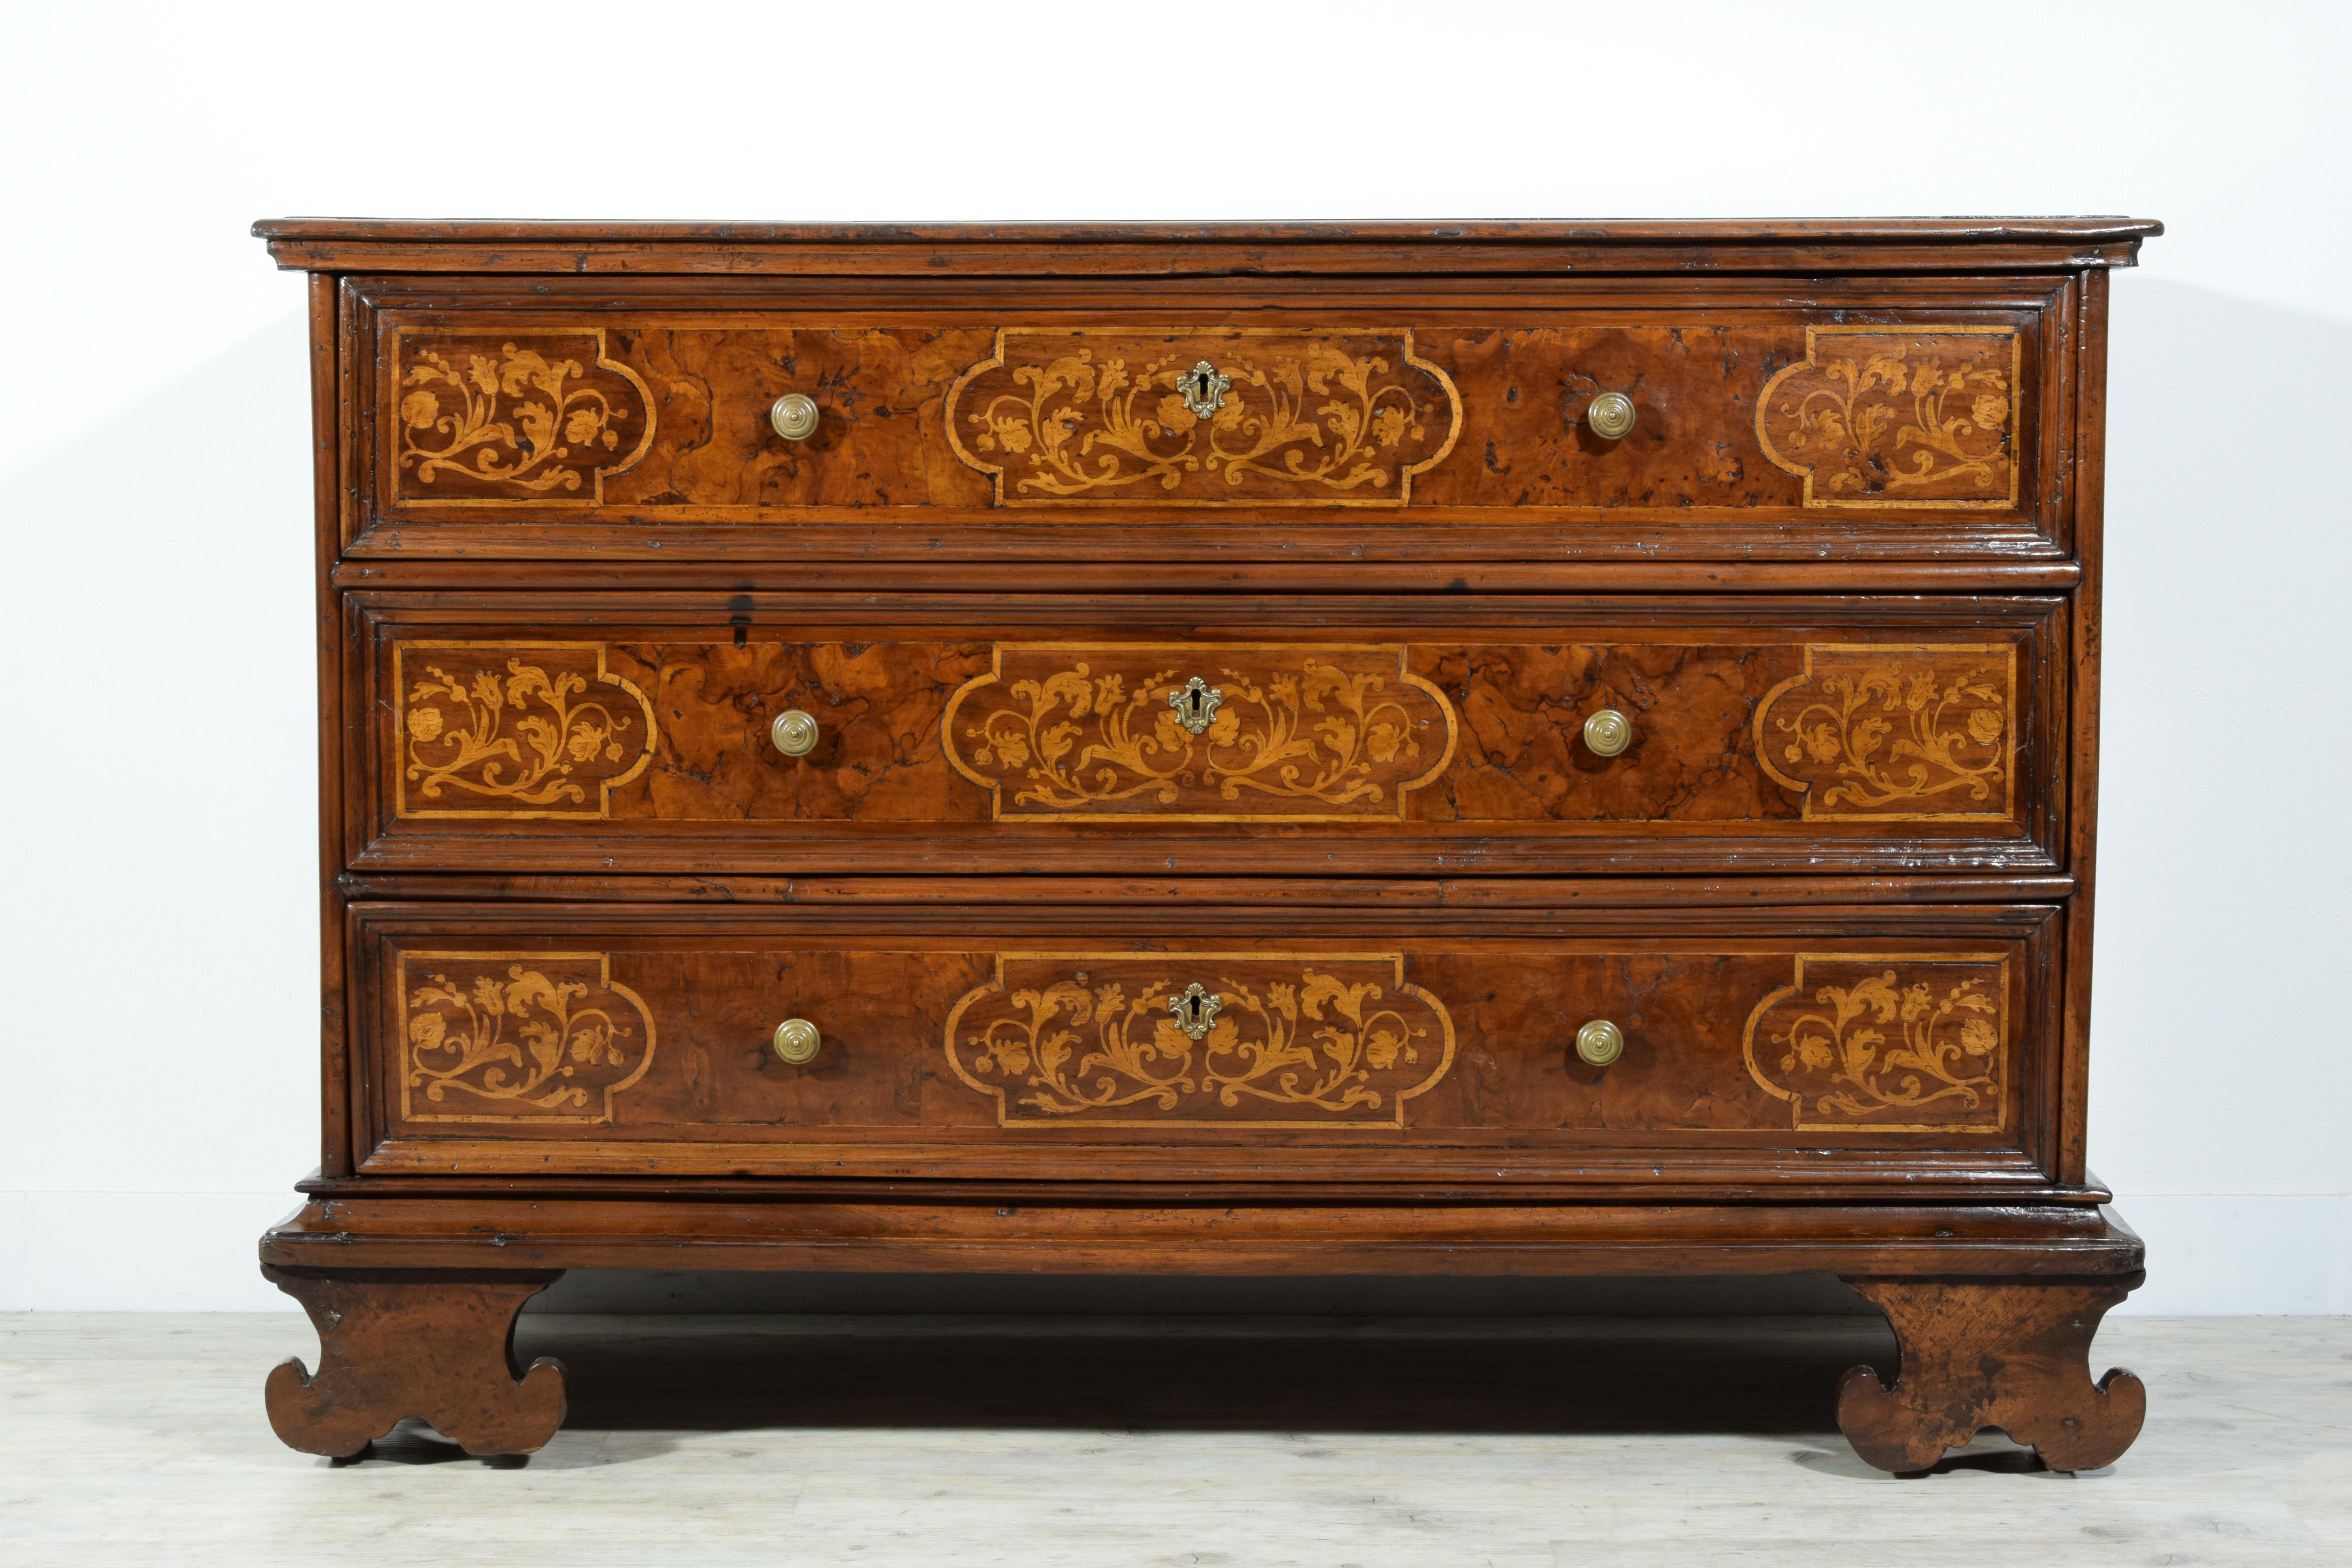 17th century, Italian Baroque large walnut chest of drawers

This large baroque dresser was made in the Lombard-Venetian area, Italy, in the seventeenth century. The structure is in solid walnut. On the front, the three large drawers are veneered